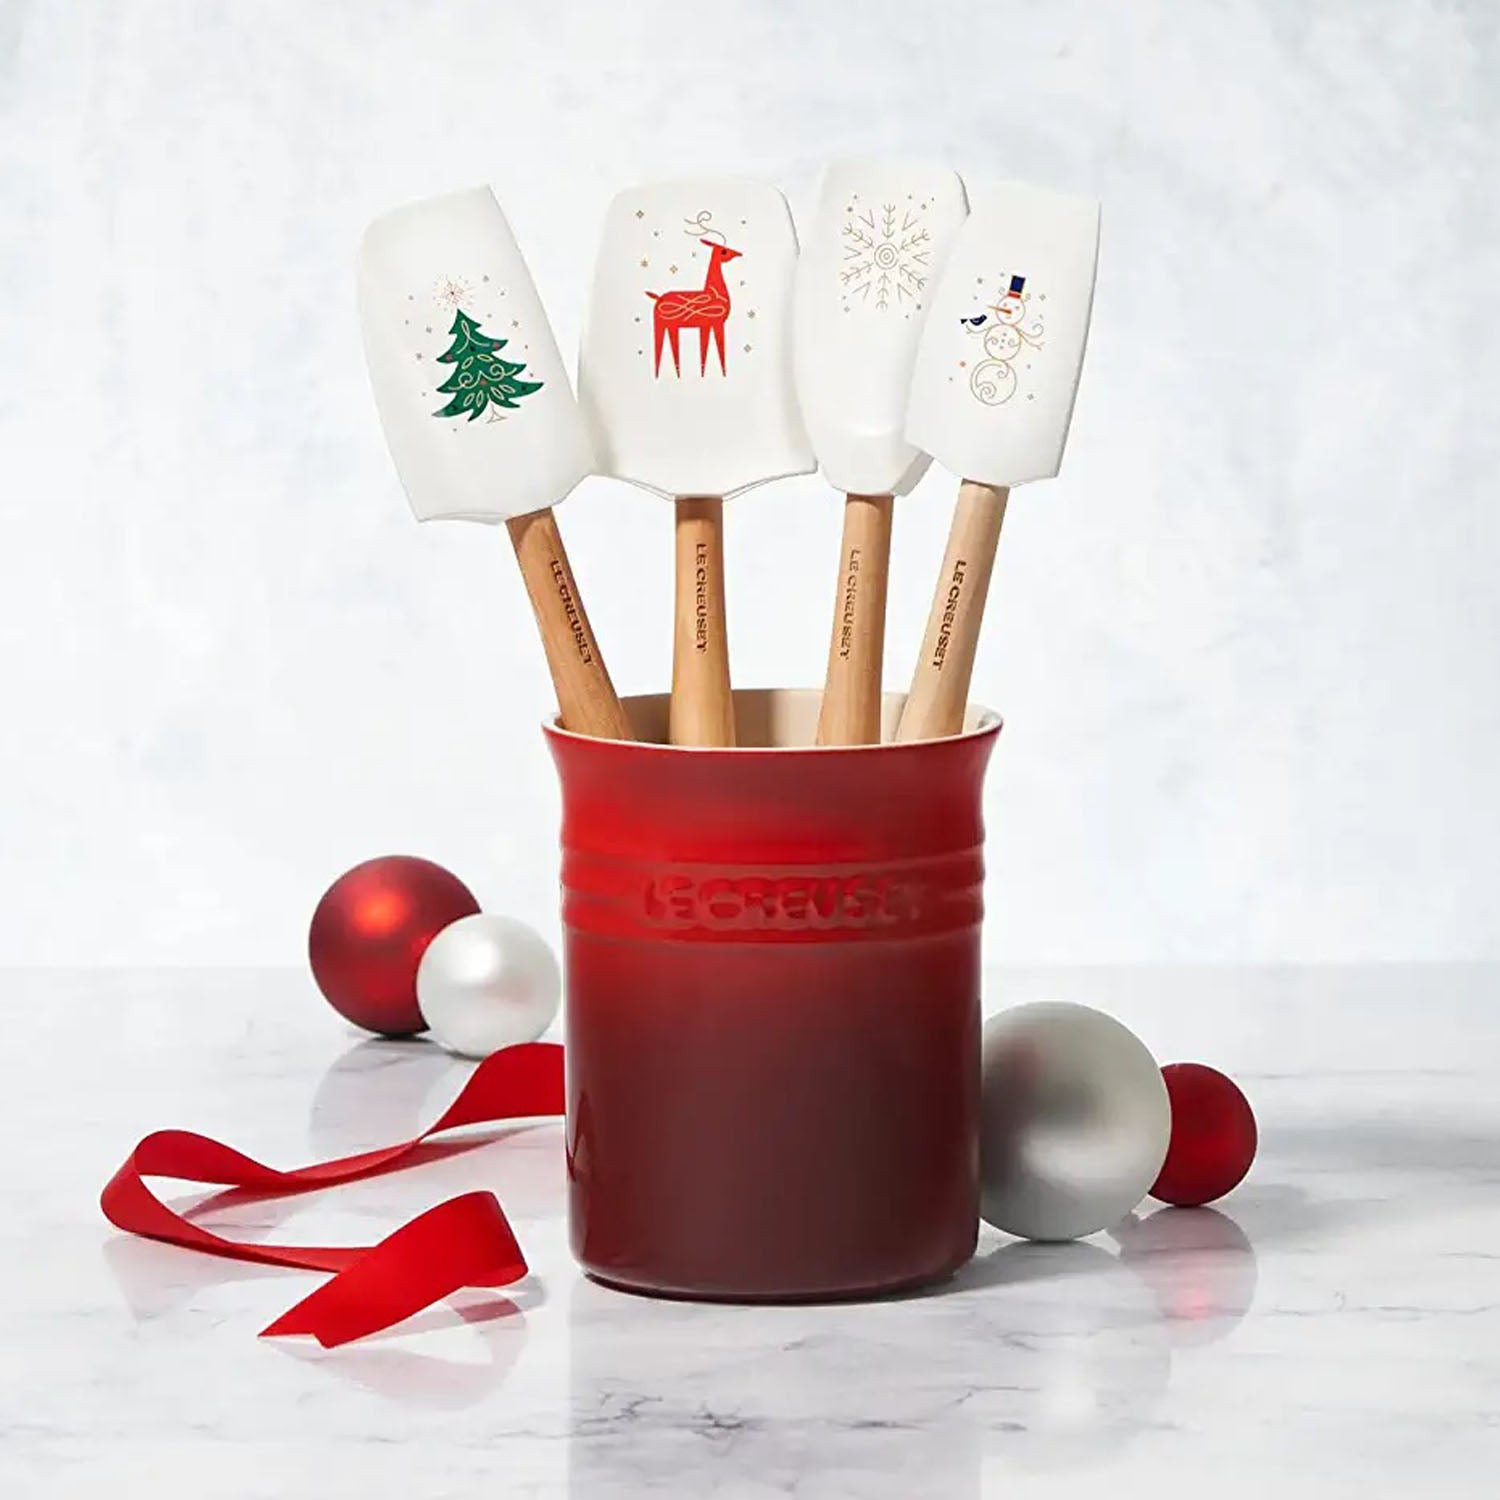  Le Creuset Silicone Craft Series Utensil Set with